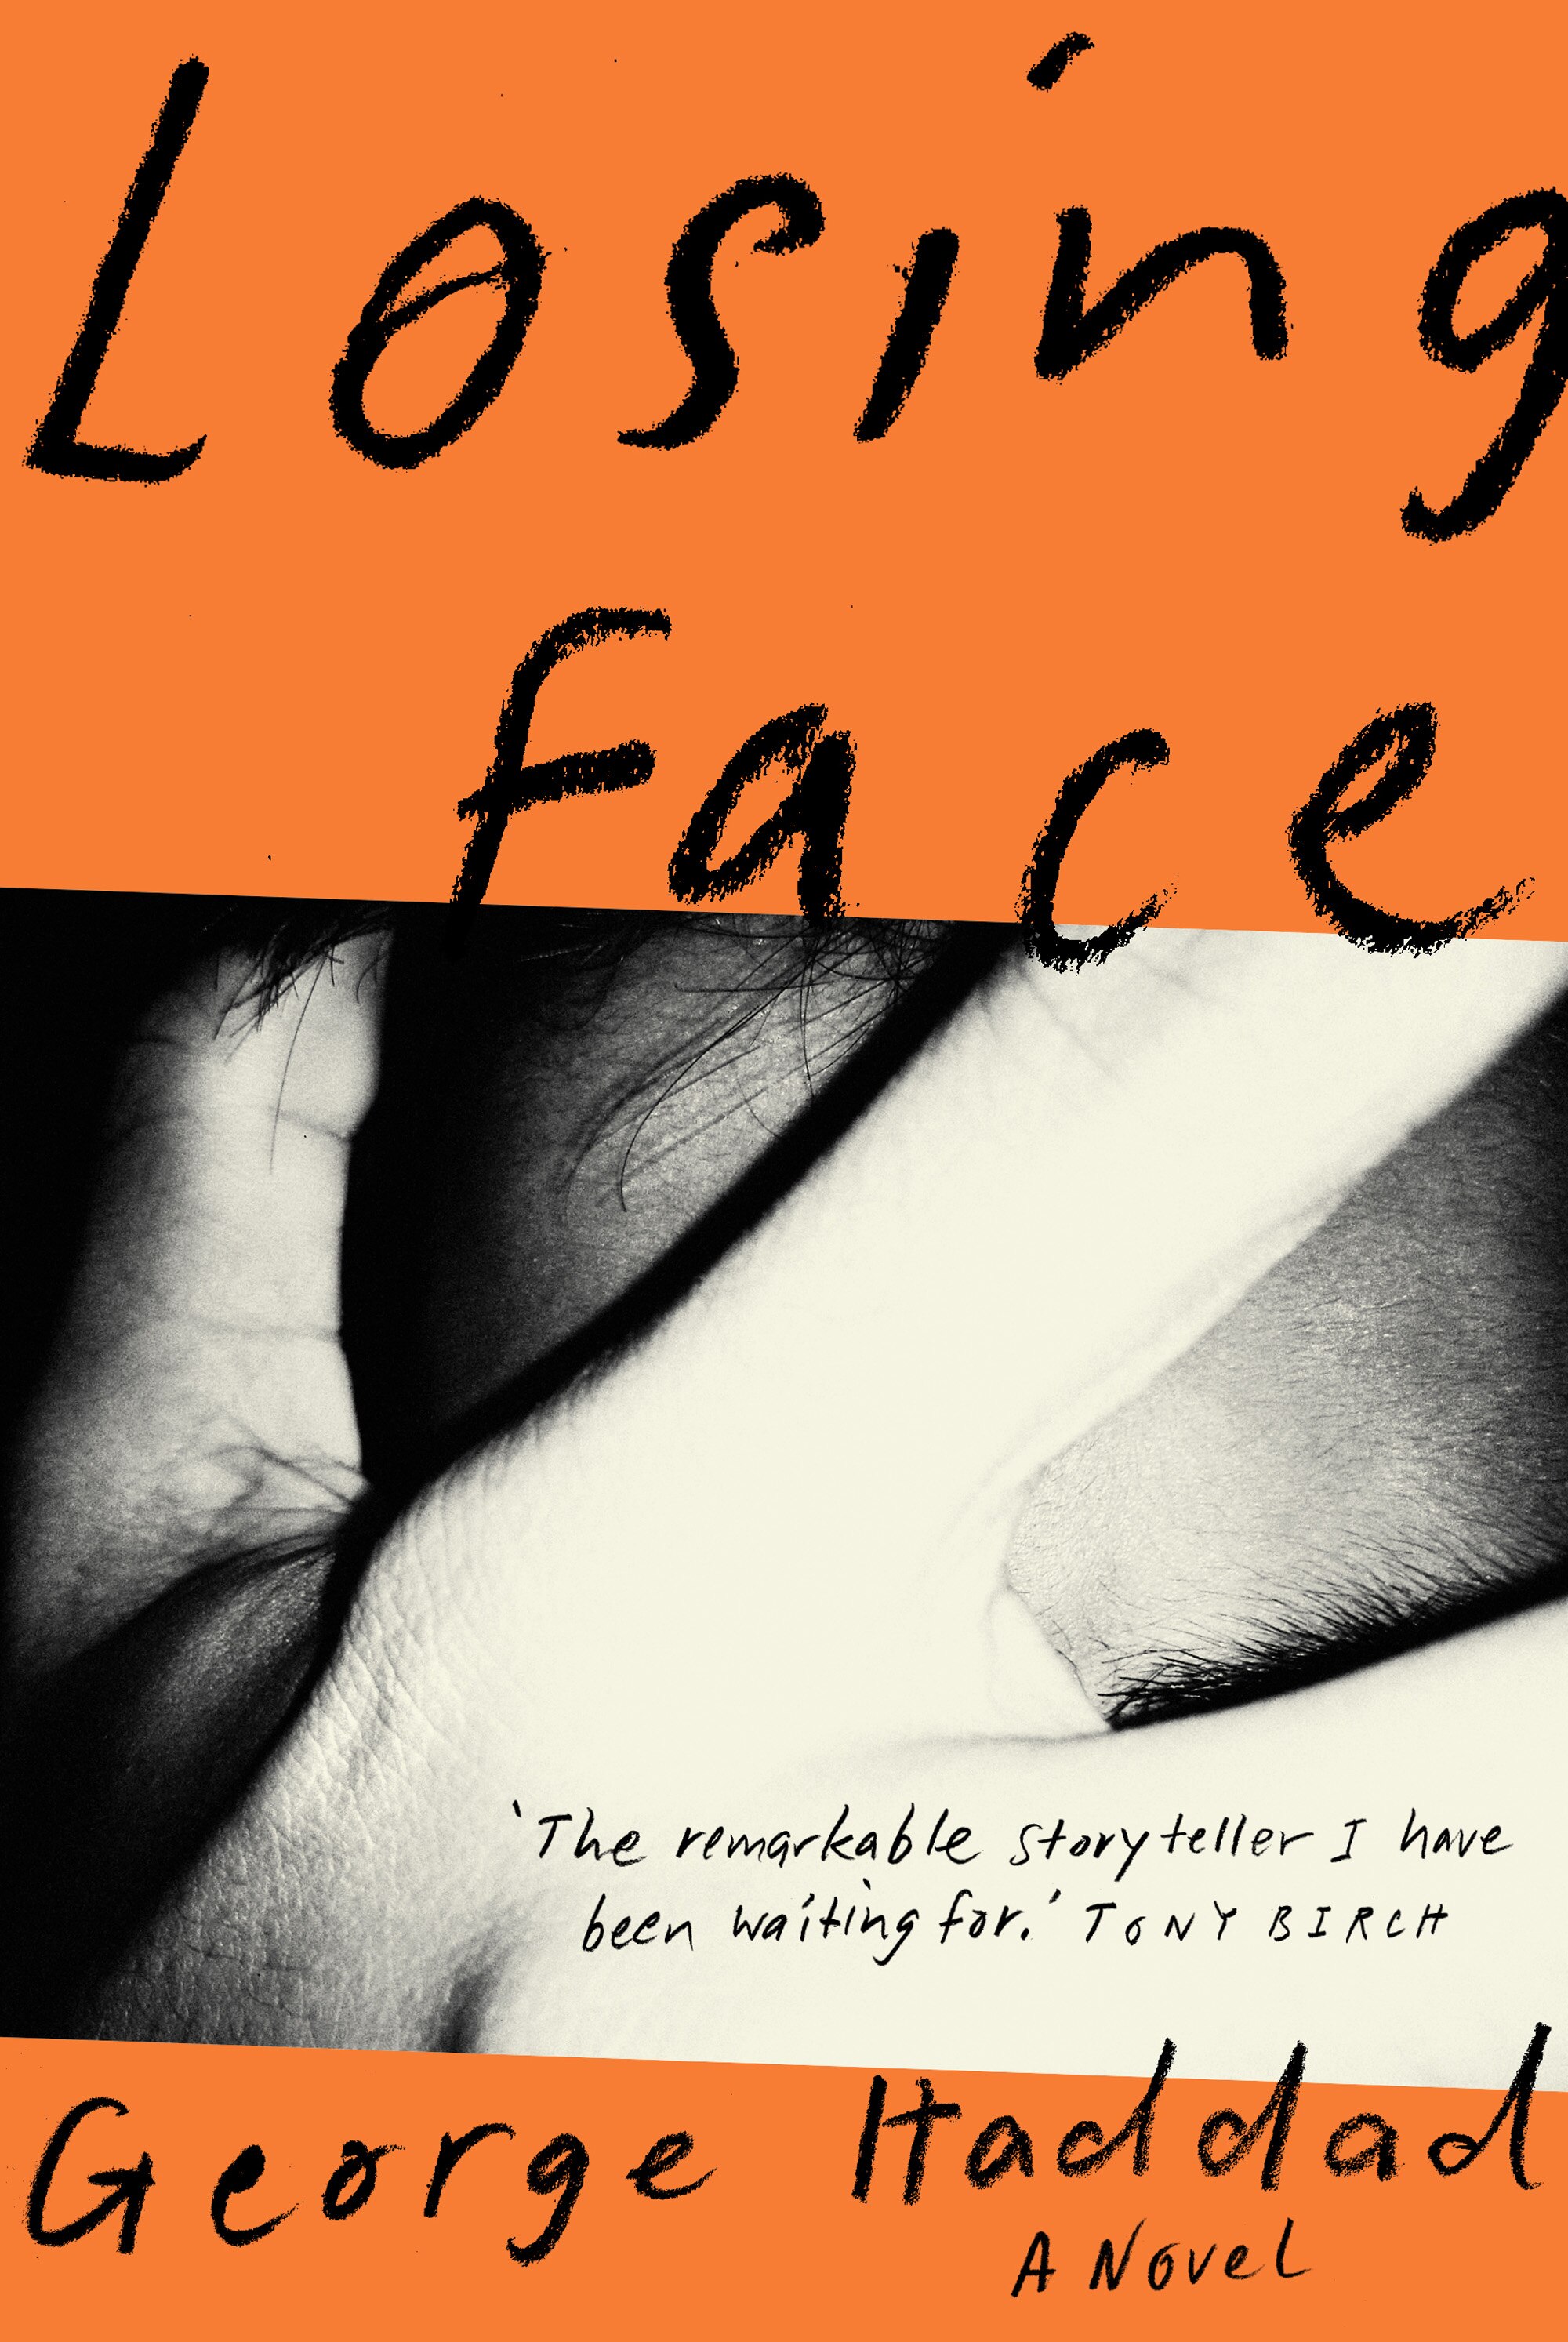 Cover of Losing Face by George Haddad  featuring a close up of a hand over a man's eyes